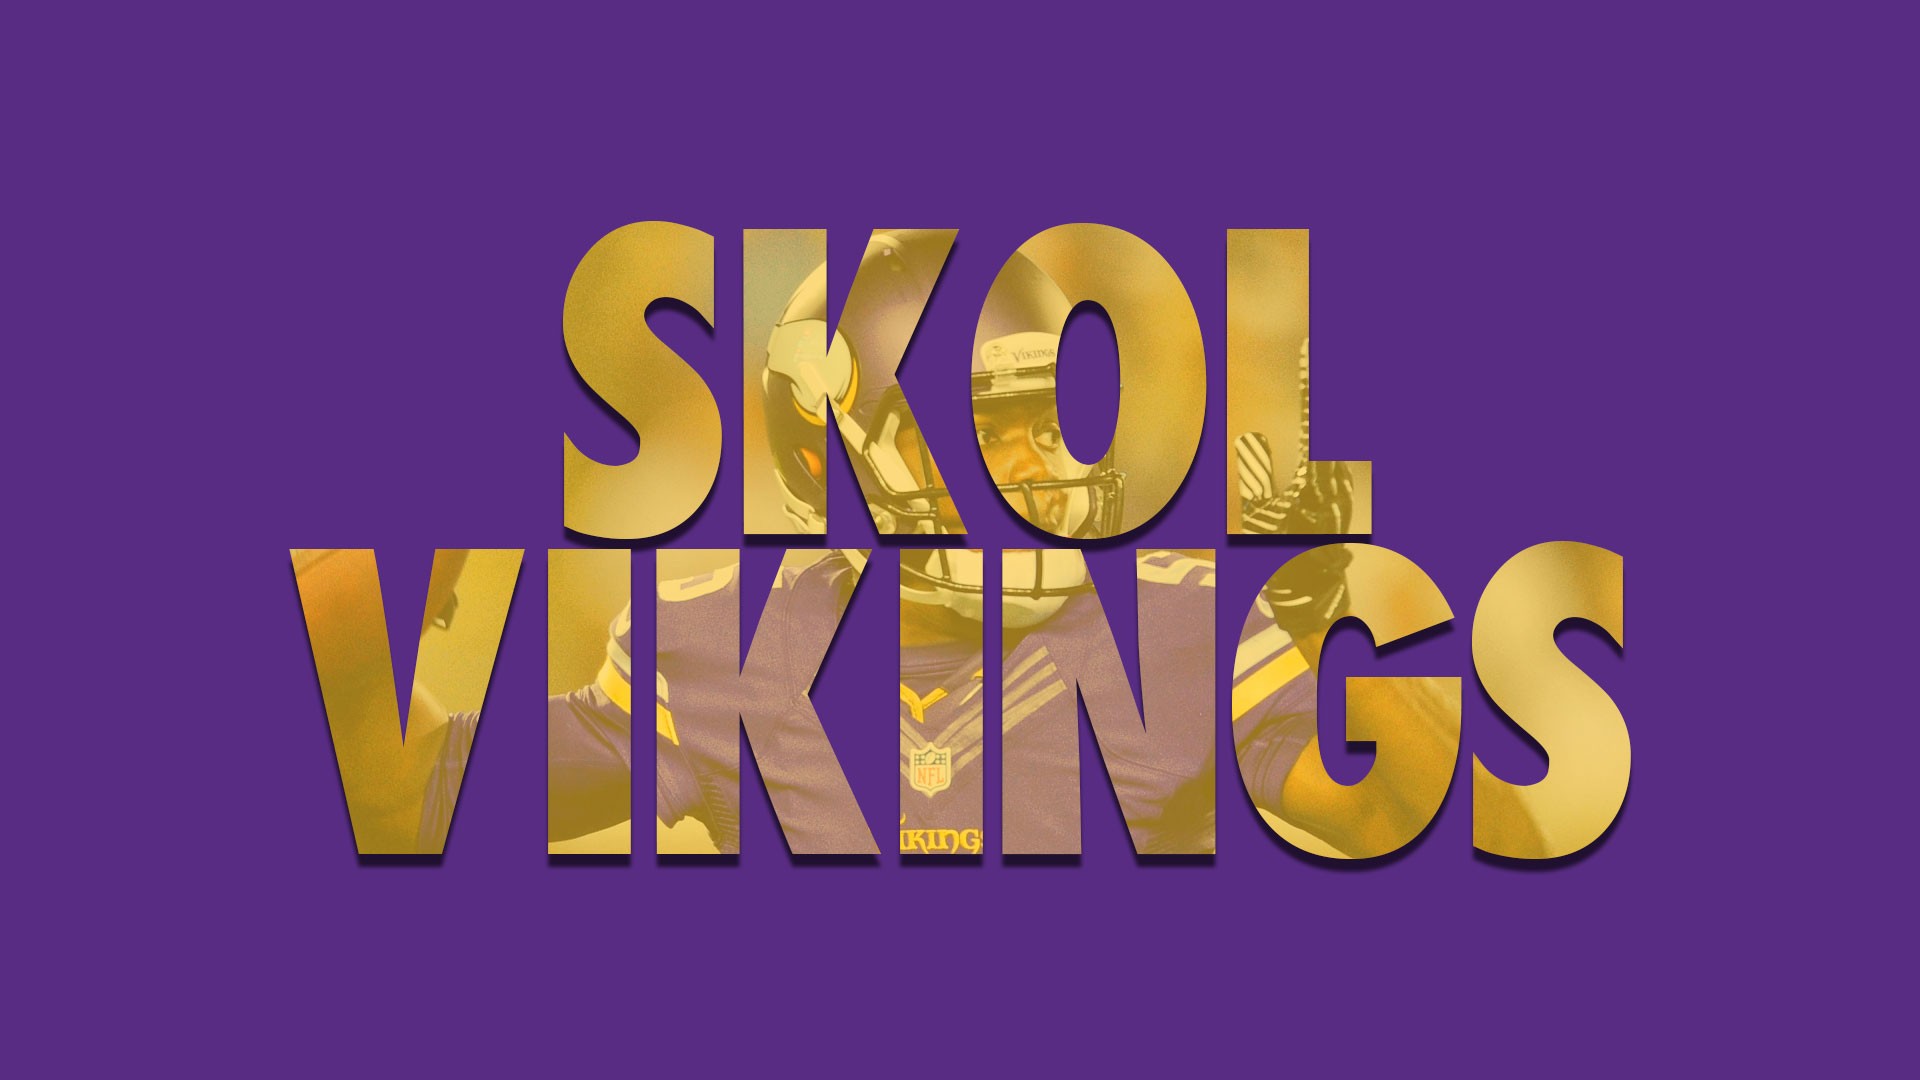 Wallpaper Desktop Minnesota Vikings HD With Resolution 1920X1080 pixel. You can make this wallpaper for your Mac or Windows Desktop Background, iPhone, Android or Tablet and another Smartphone device for free